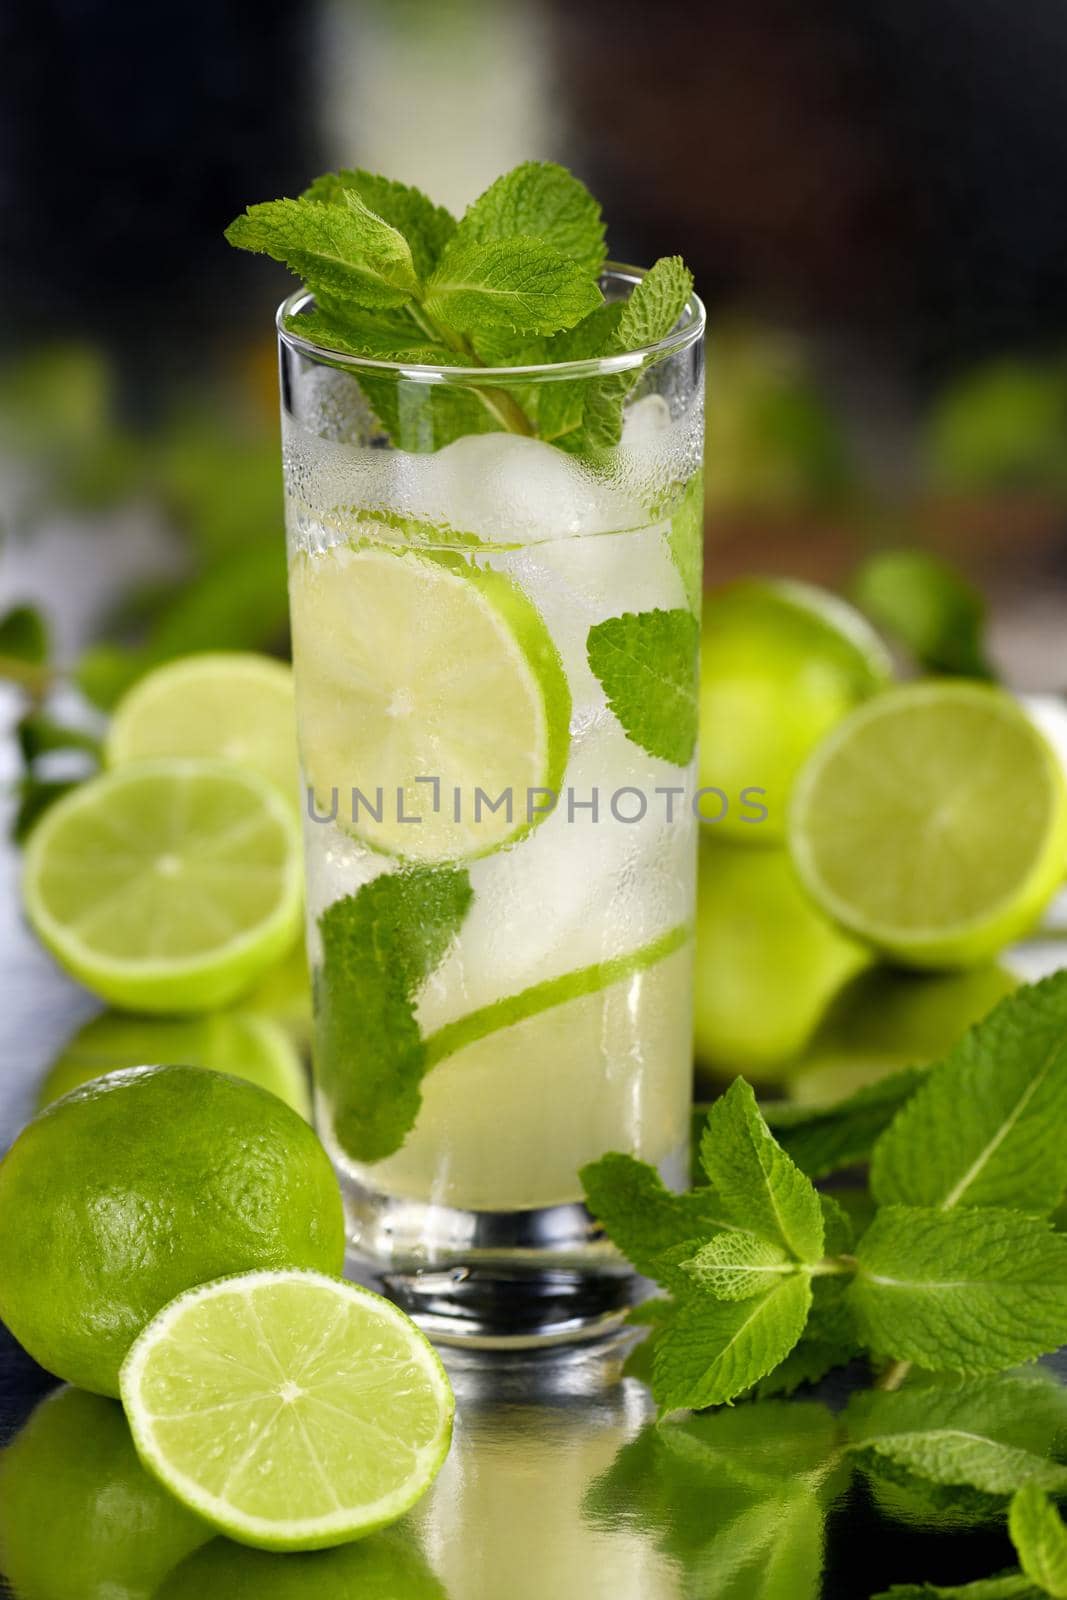 Refreshing organic Mojito cocktail made from fresh lime, white rum combined with fresh juice and mint. This is the perfect cocktail for summer days.